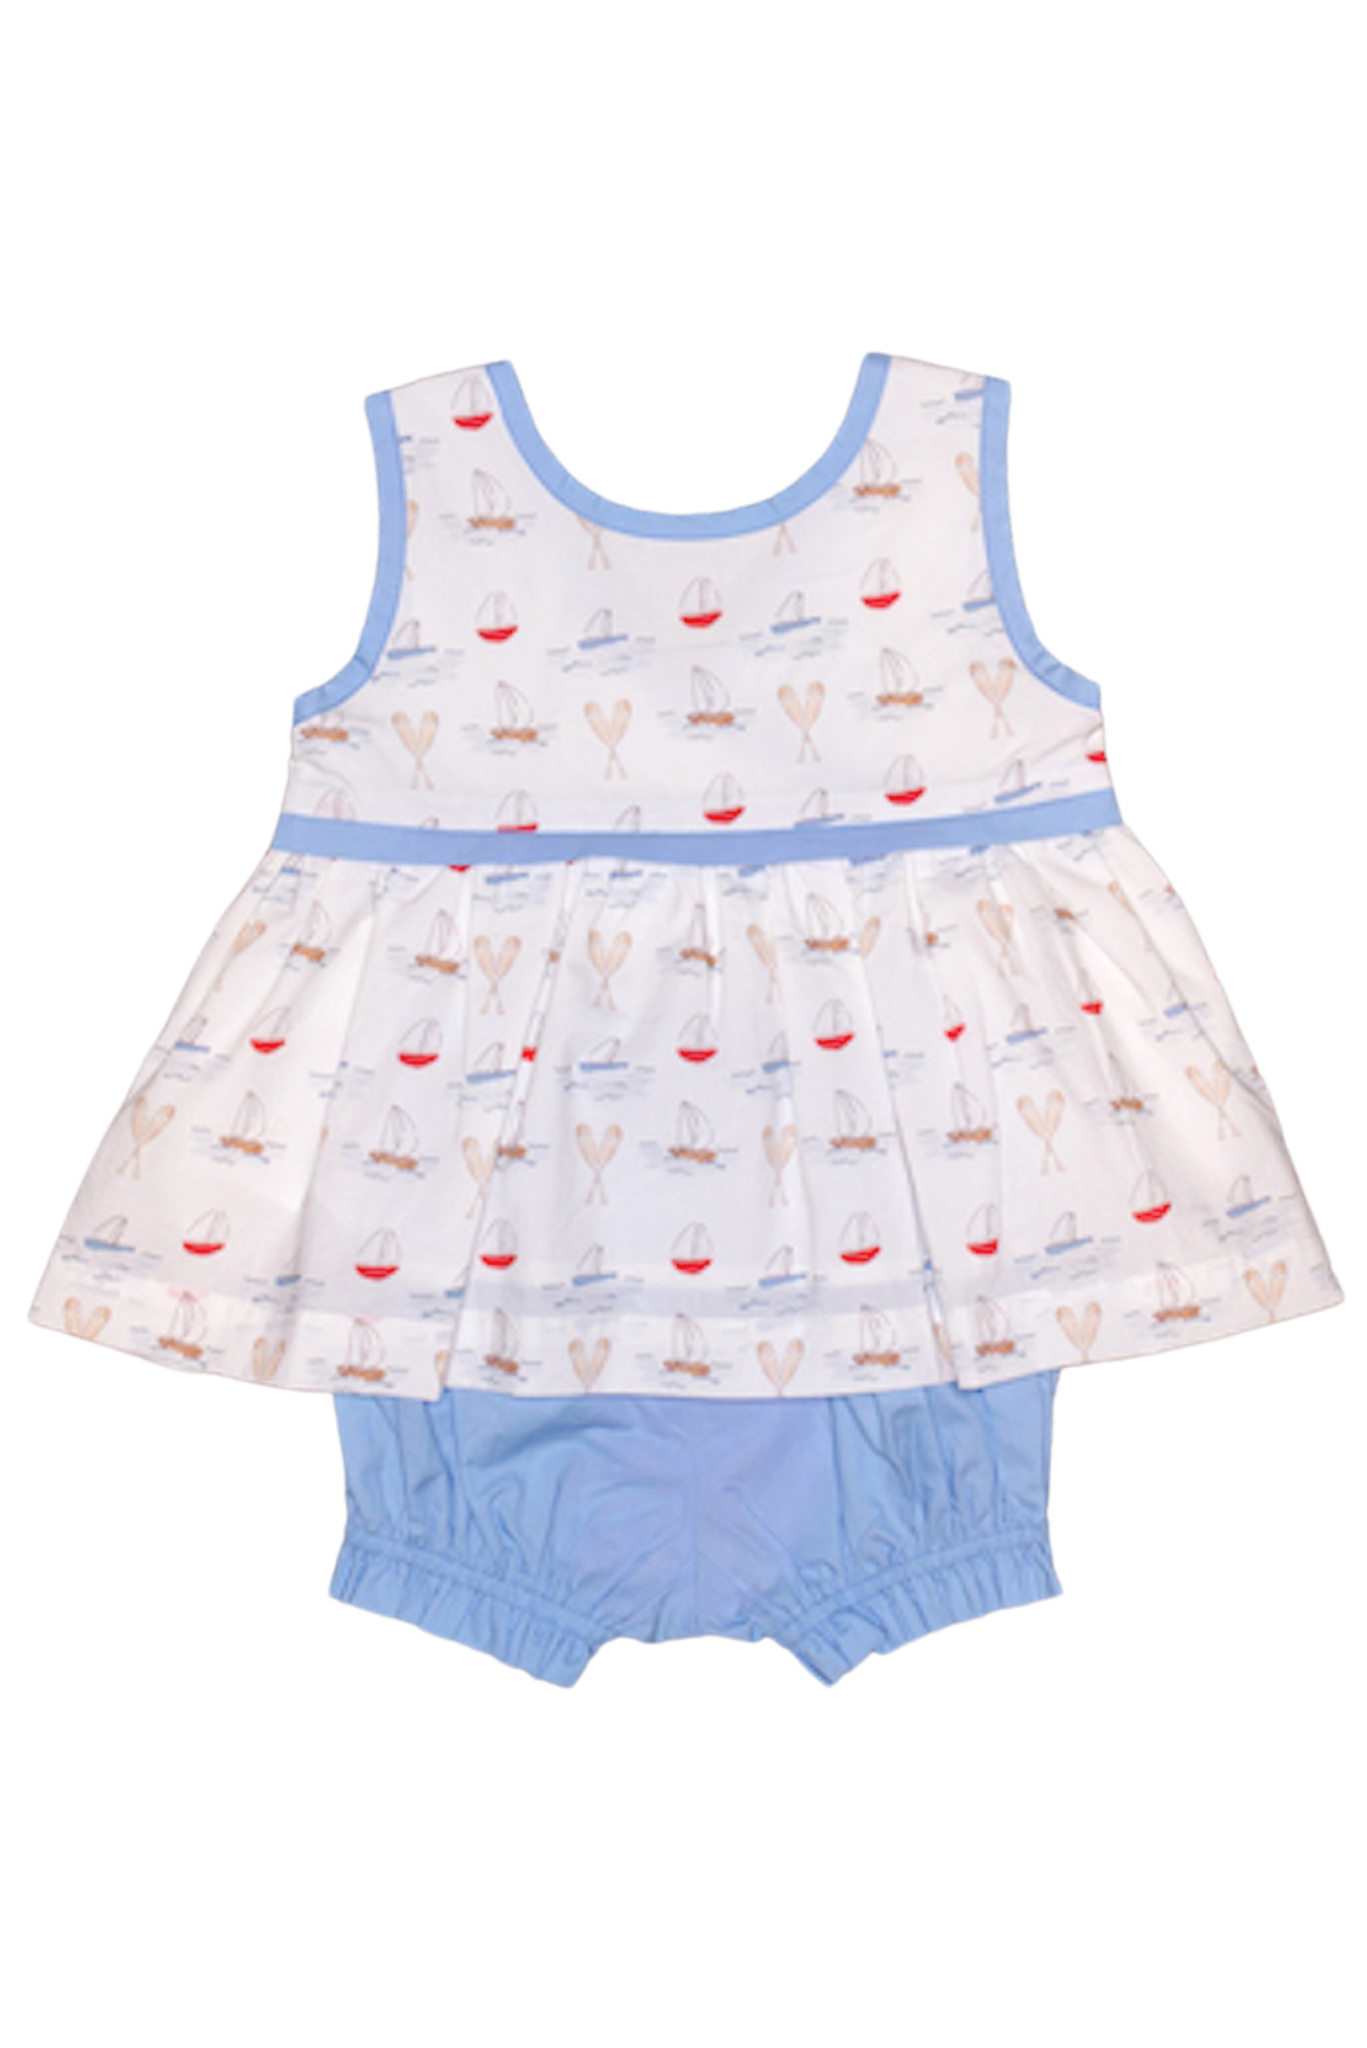 Girl's Custom Sailboat Print Apron Set with Coordinating Blue Bloomers